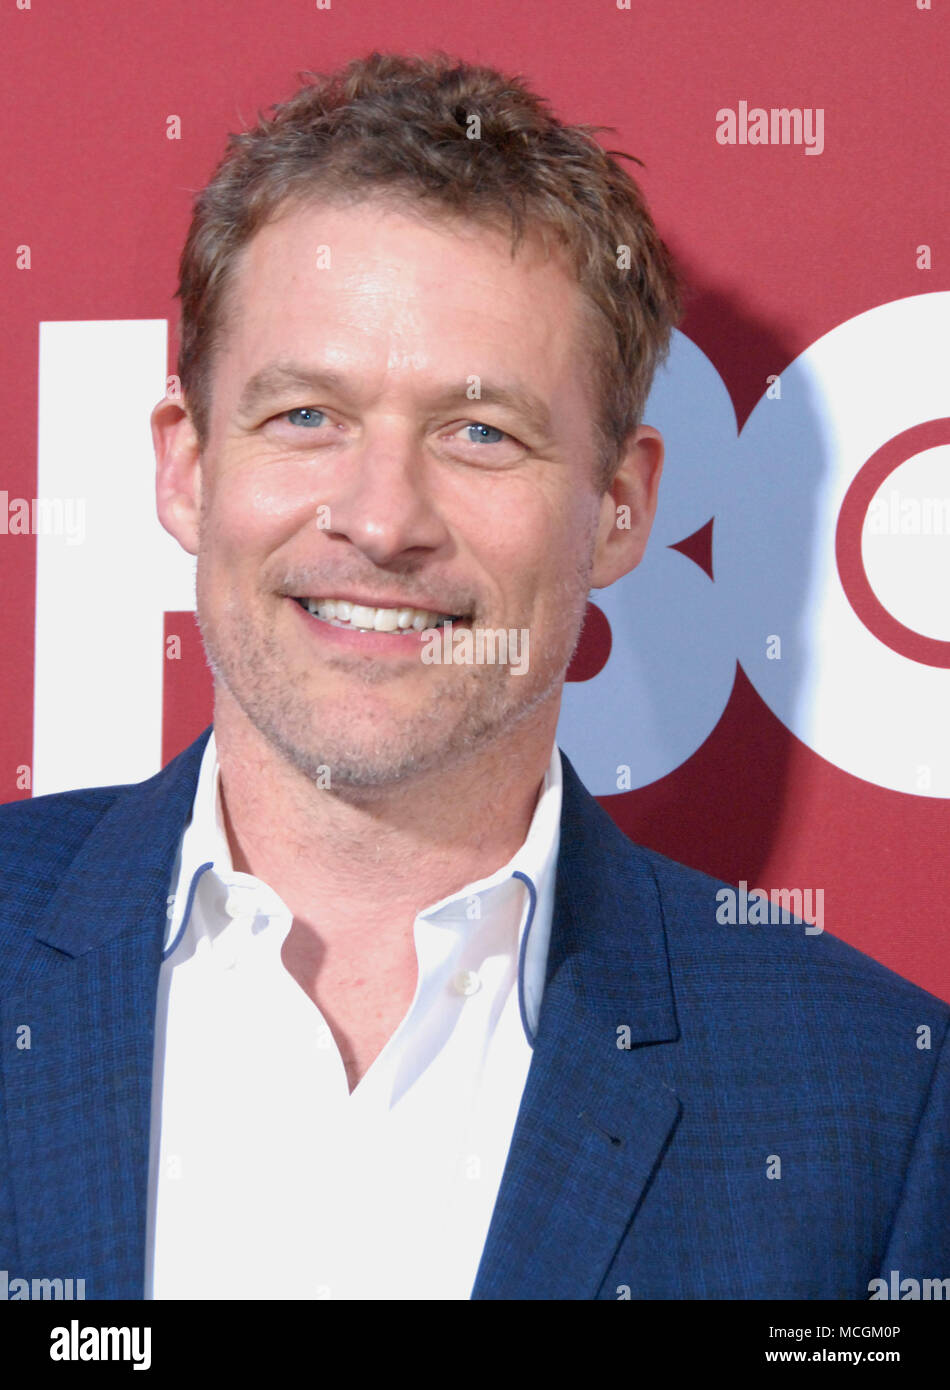 James Tupper High Resolution Stock Photography and Images - Alamy